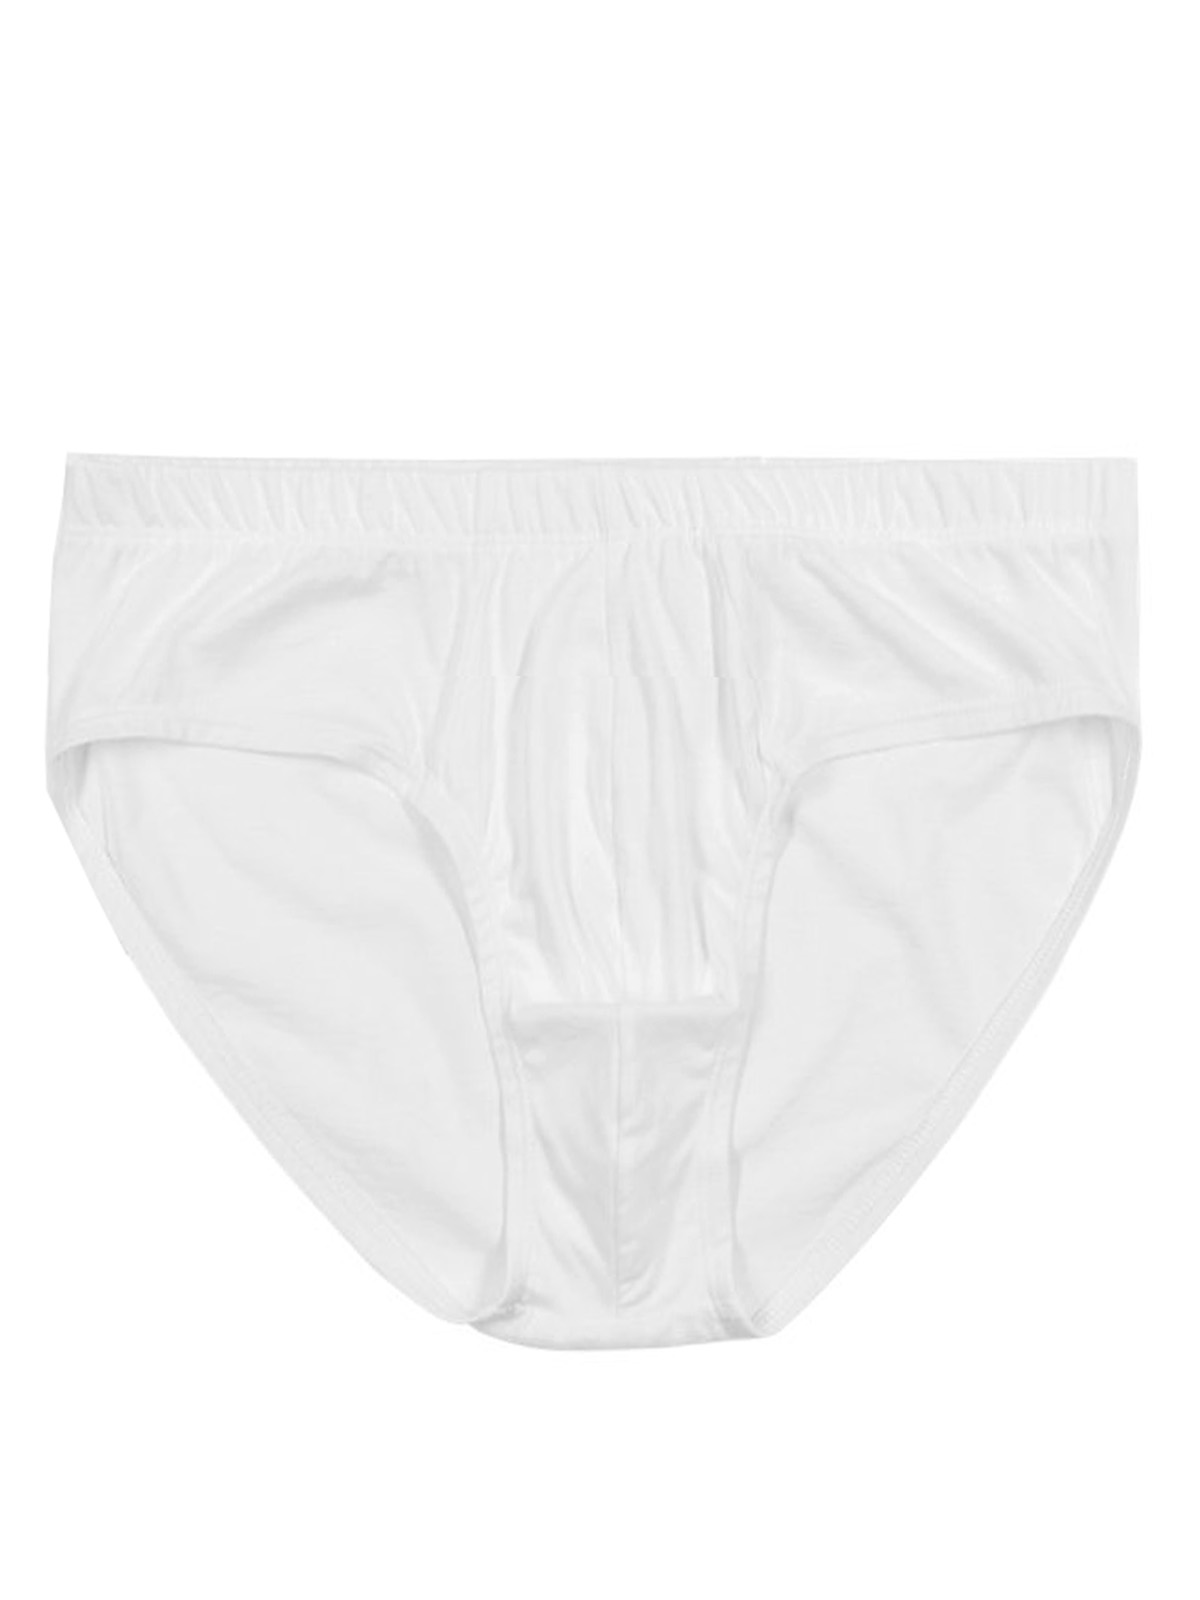 Marks and Spencer - - M&5 WHITE Mens Pure Cotton Cool & Fresh Slips ...